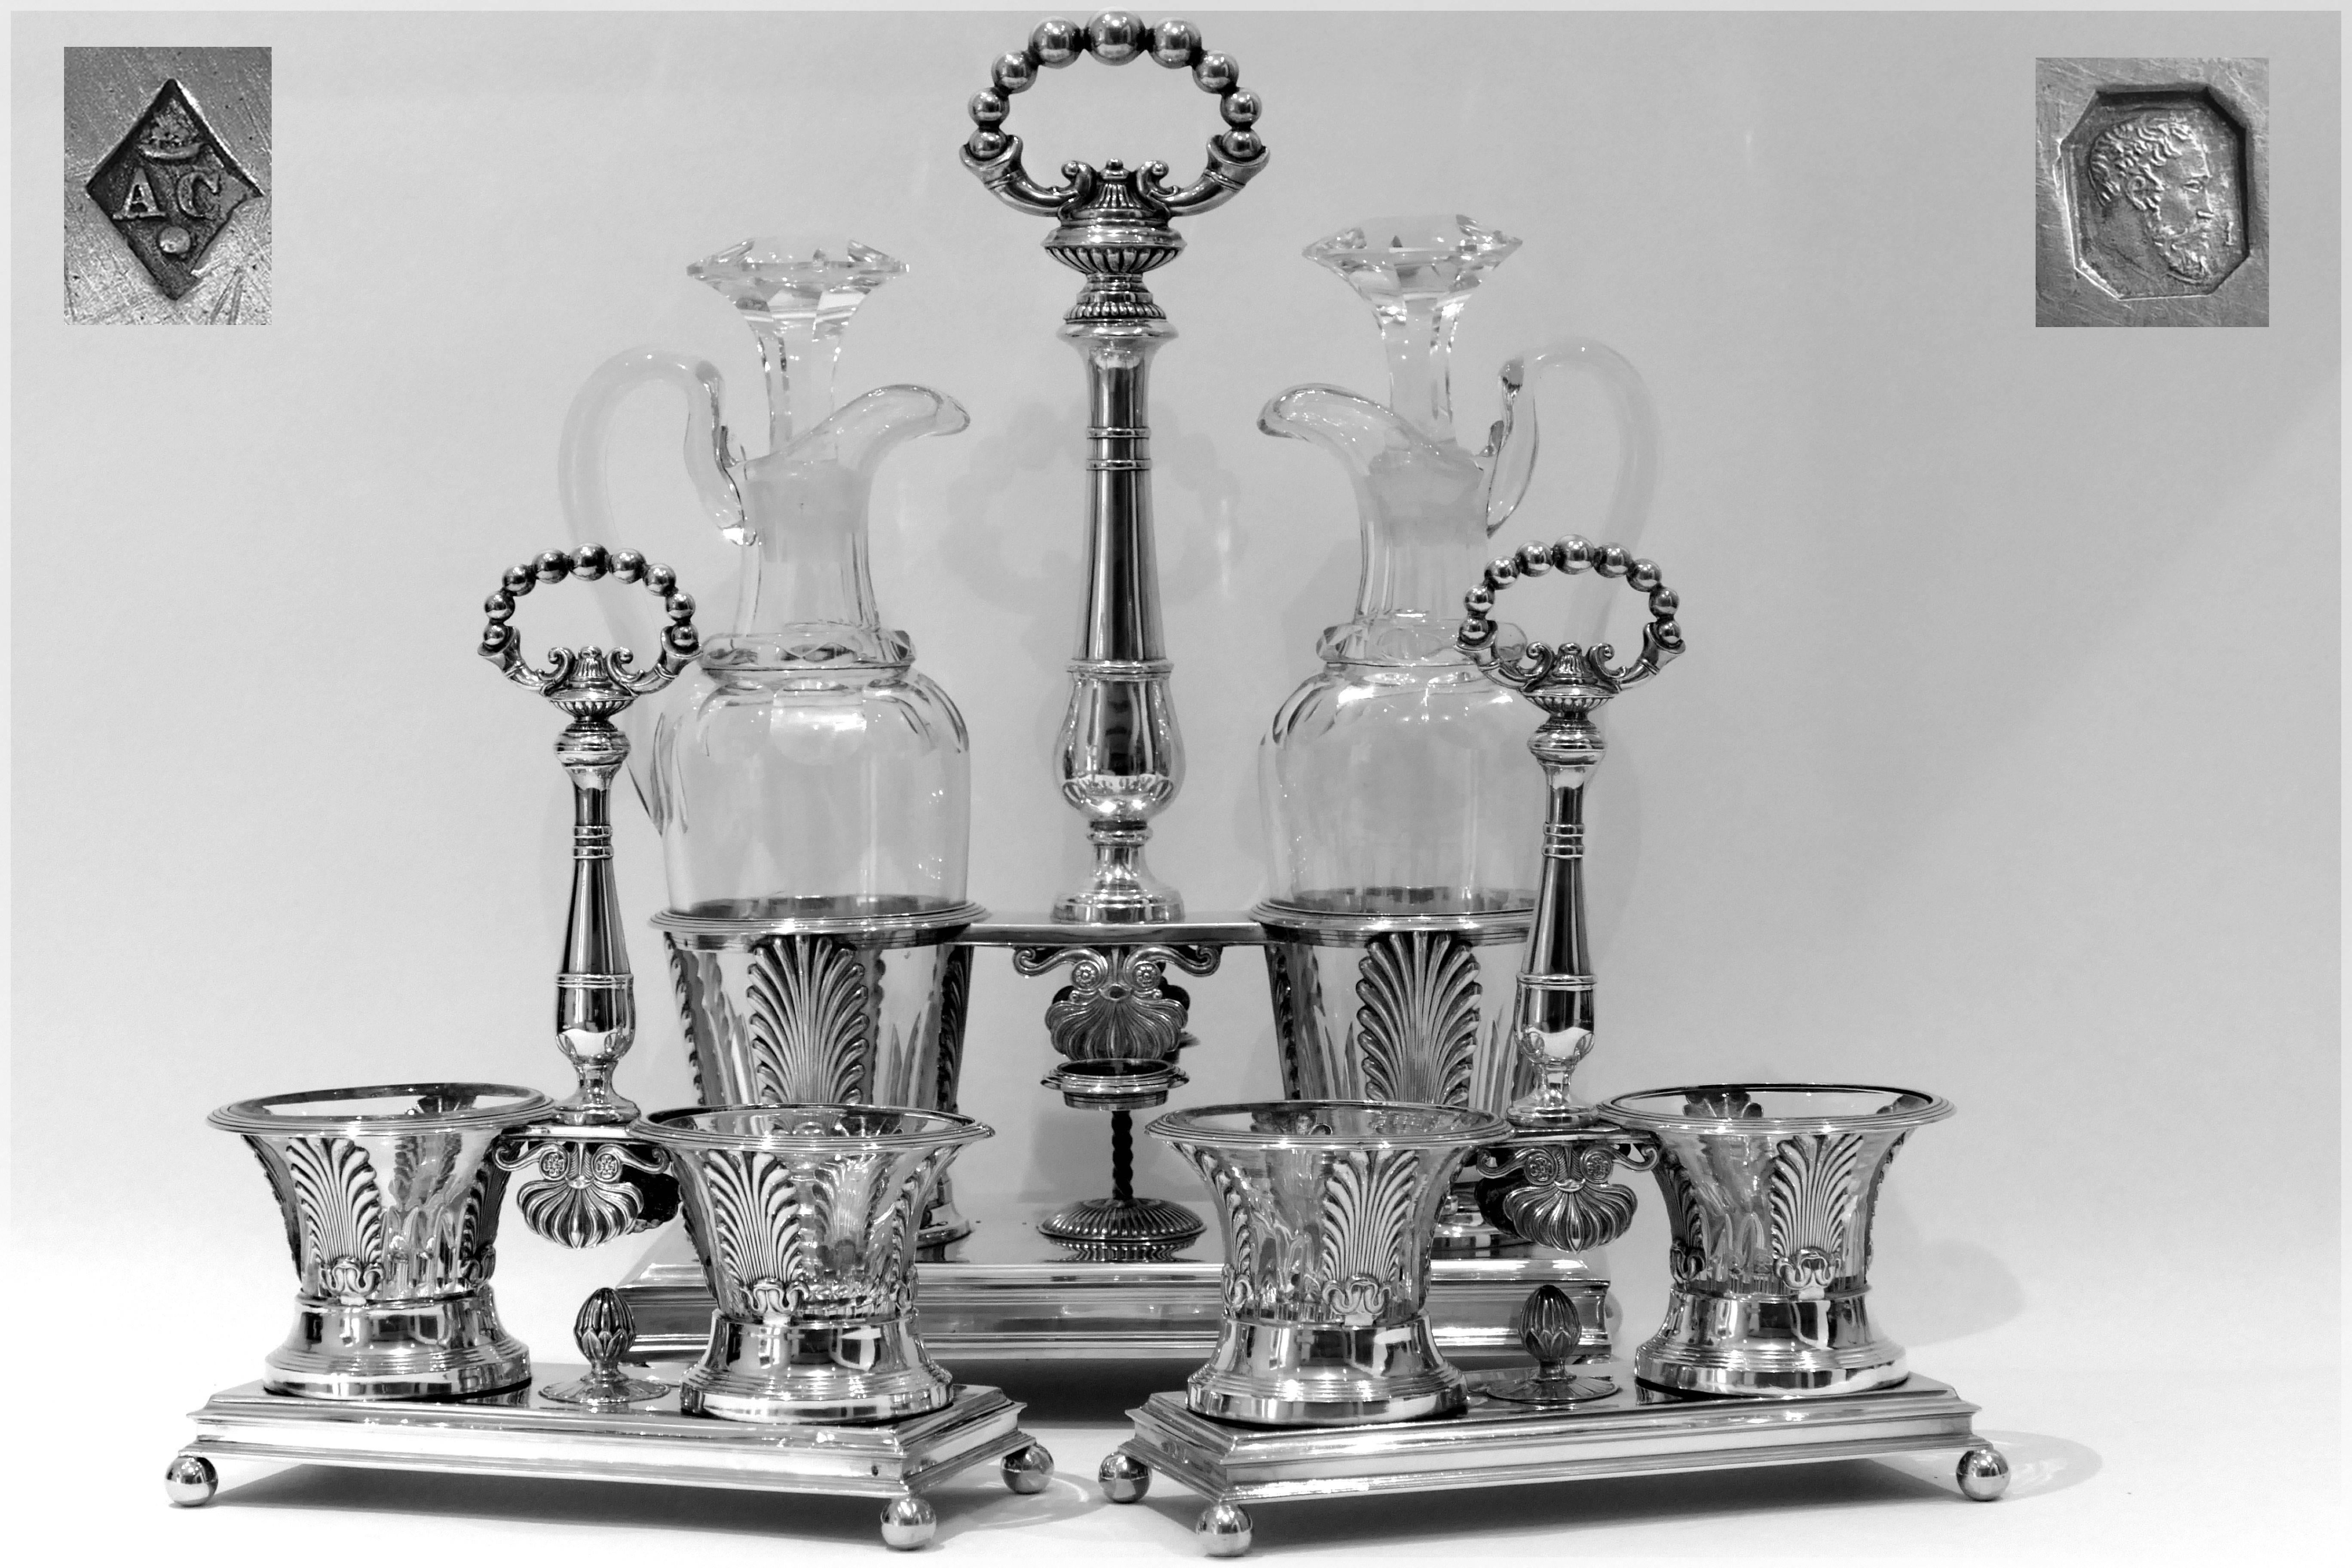 1819 imposing French sterling silver and Baccarat crystal bottles condiment set. 

For Paris 1819-1838, "vieillard", Michel-Ange. 1st titre mark for 950/1000 French sterling silver guarantee.

Extremely rare and imposing antique French